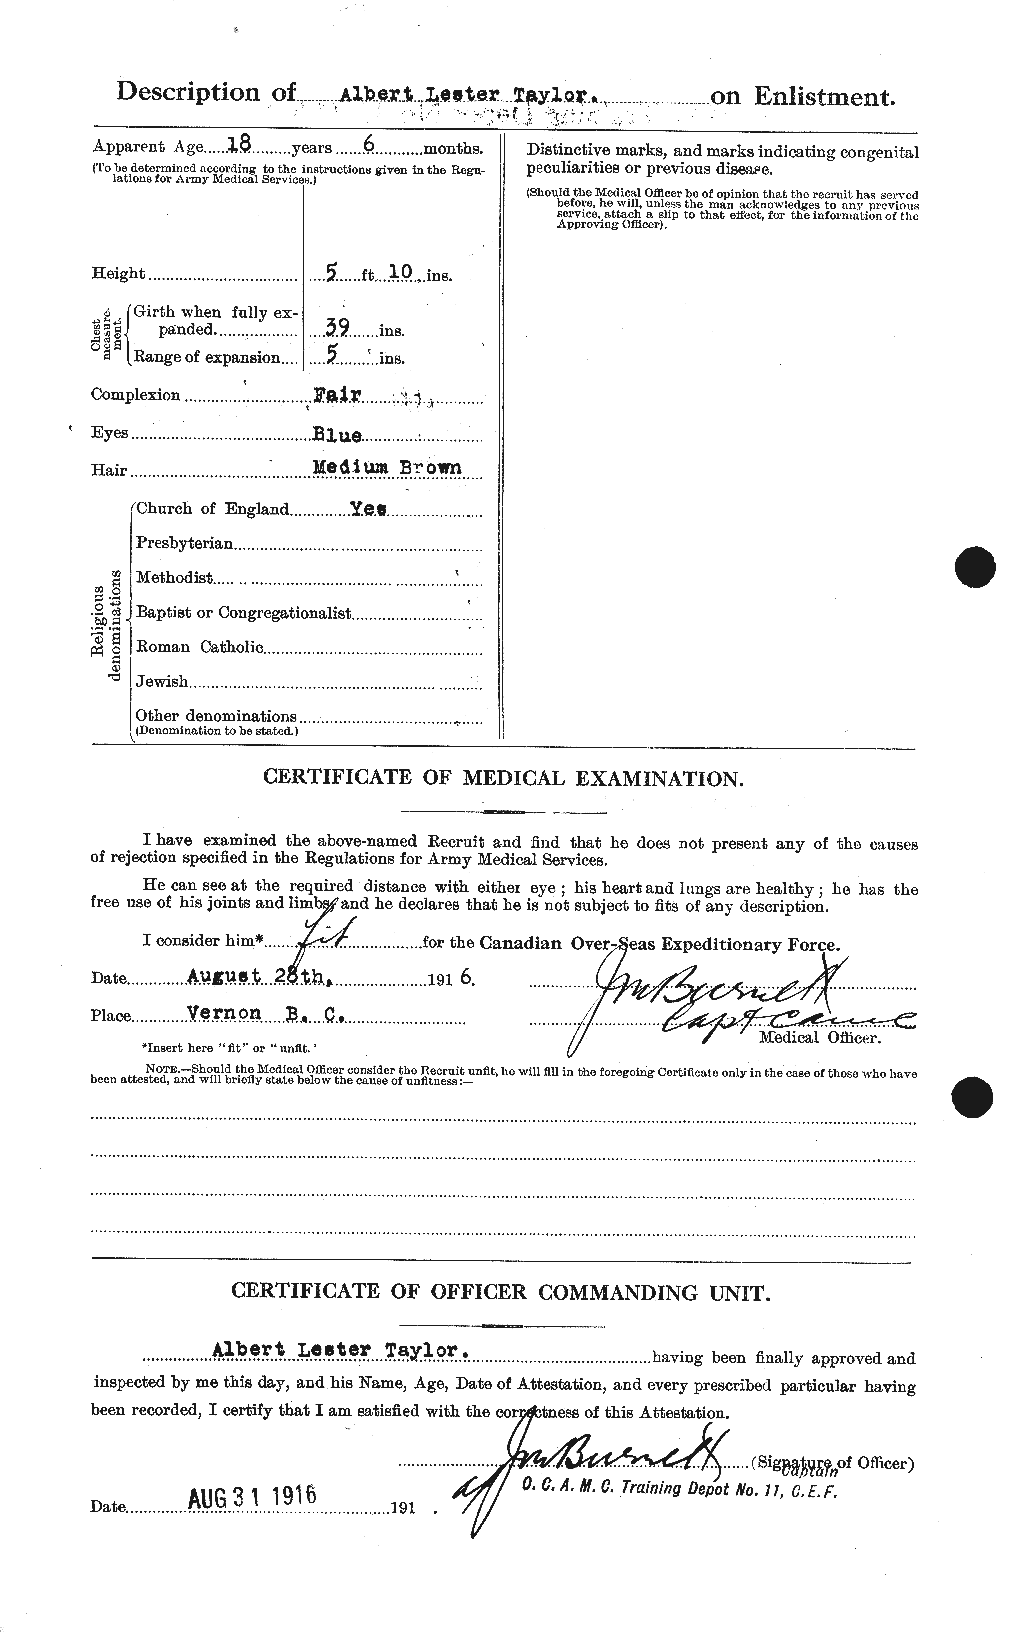 Personnel Records of the First World War - CEF 626122b